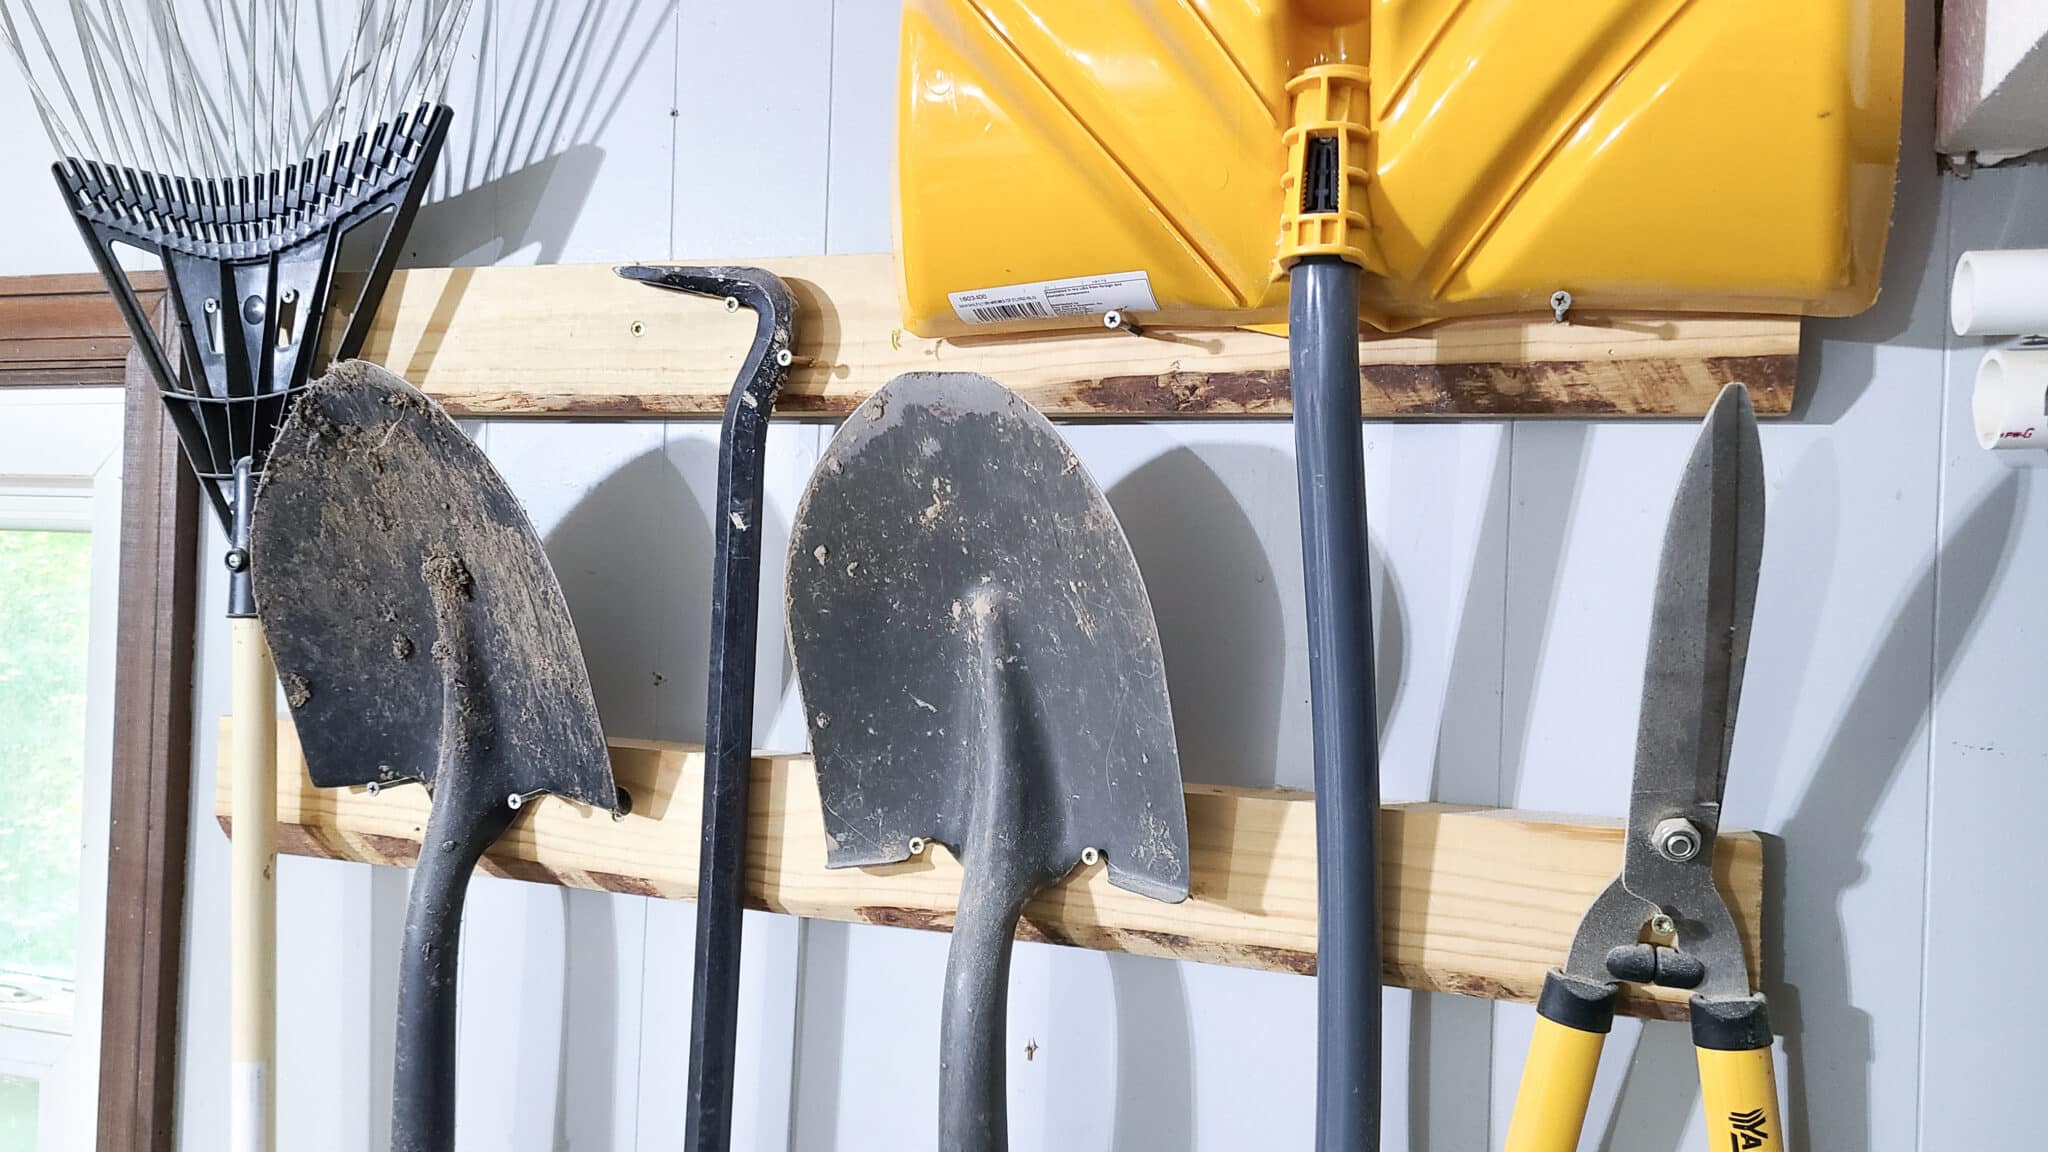 Tools hanging from screws on a wall to help organize a garage or workshop